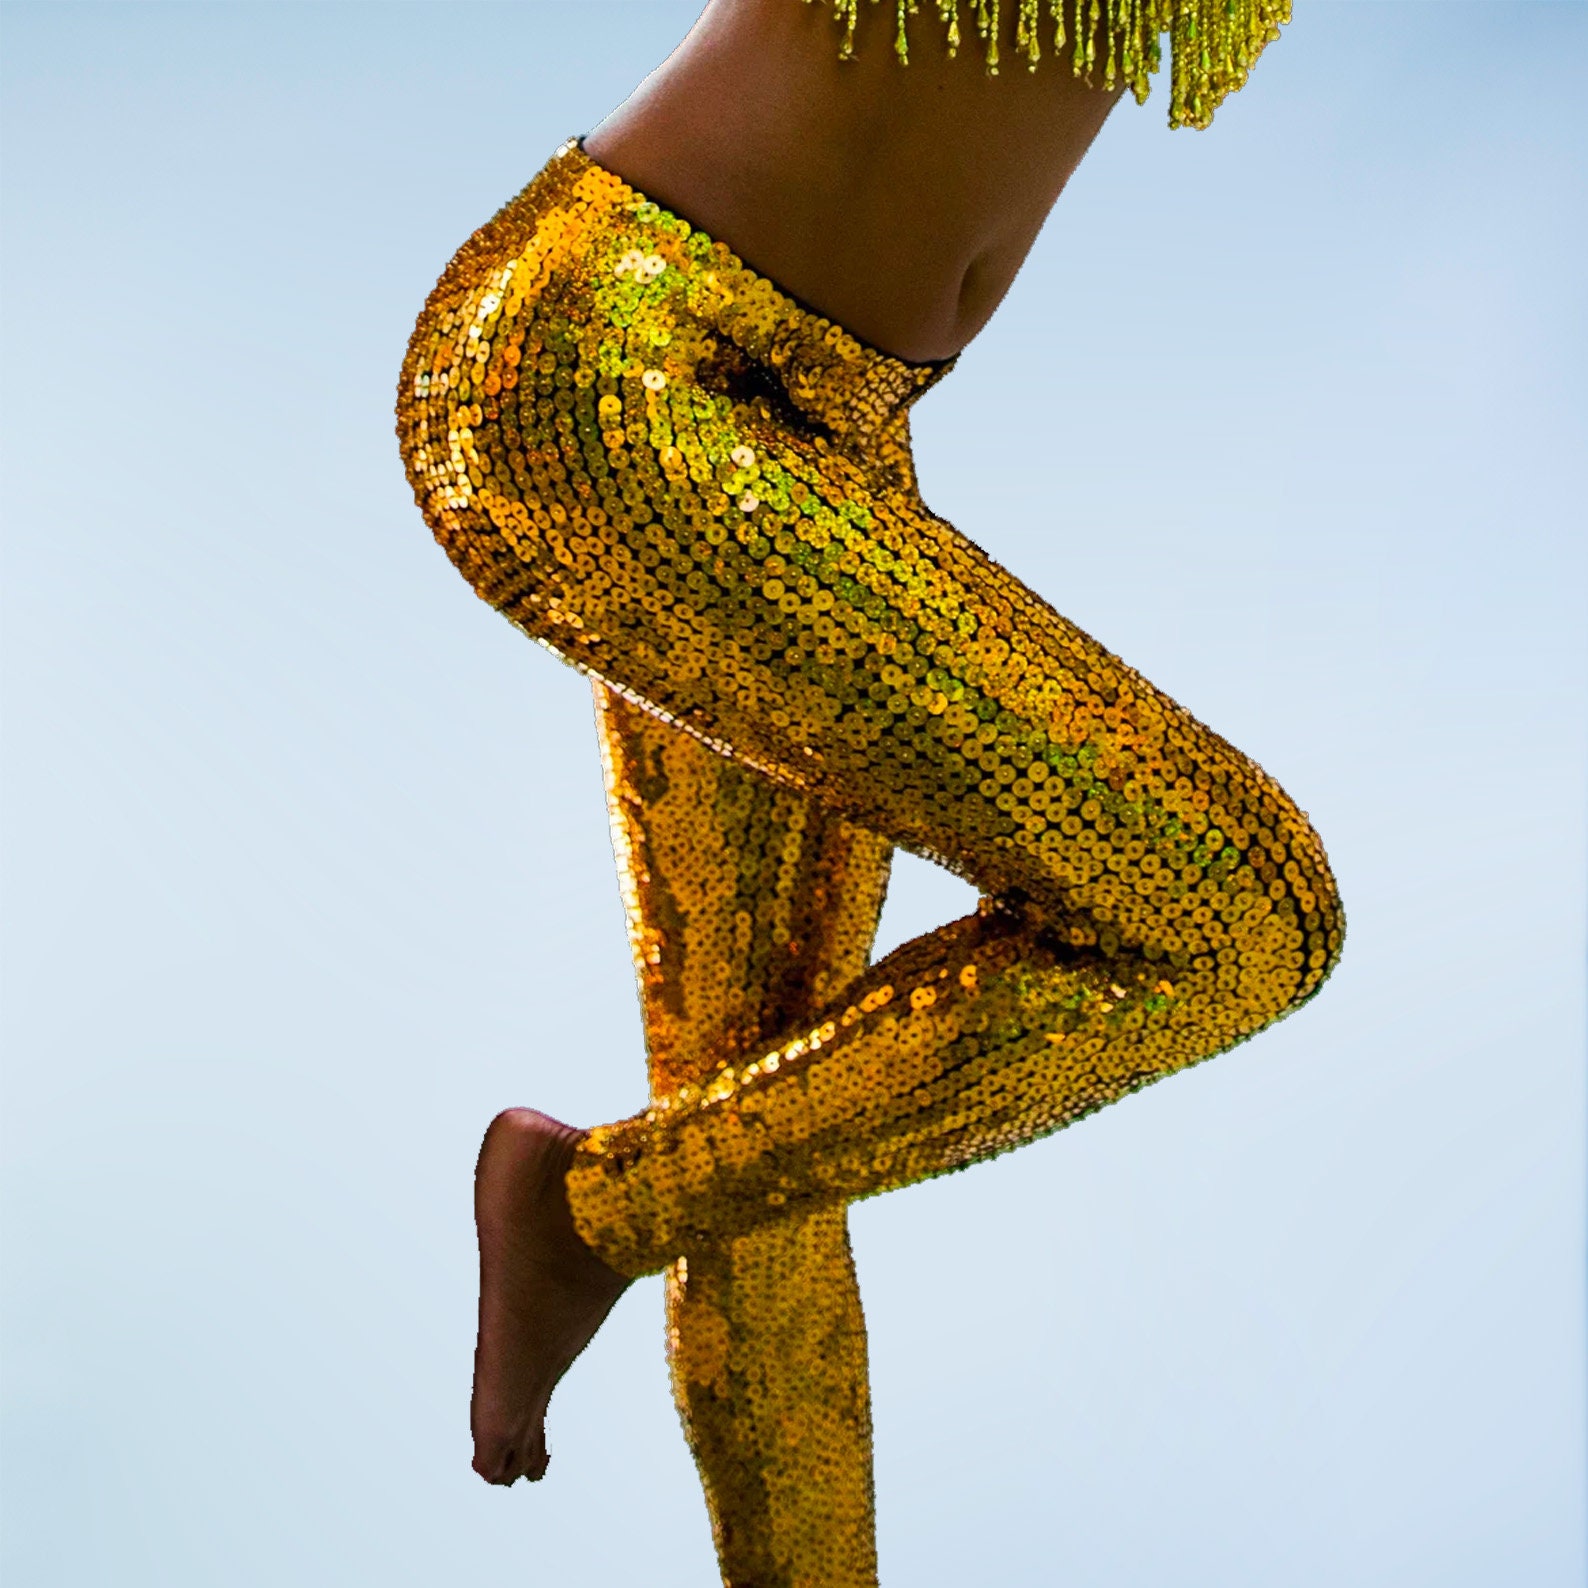 Buy Gold Metallic Foil Leggings Golden Wet Look Tights Women Workout  Clothing Gym Shiny Bling Bling Yoga Pants Gym Shaping Push up Bottoms Plus  Online in India 